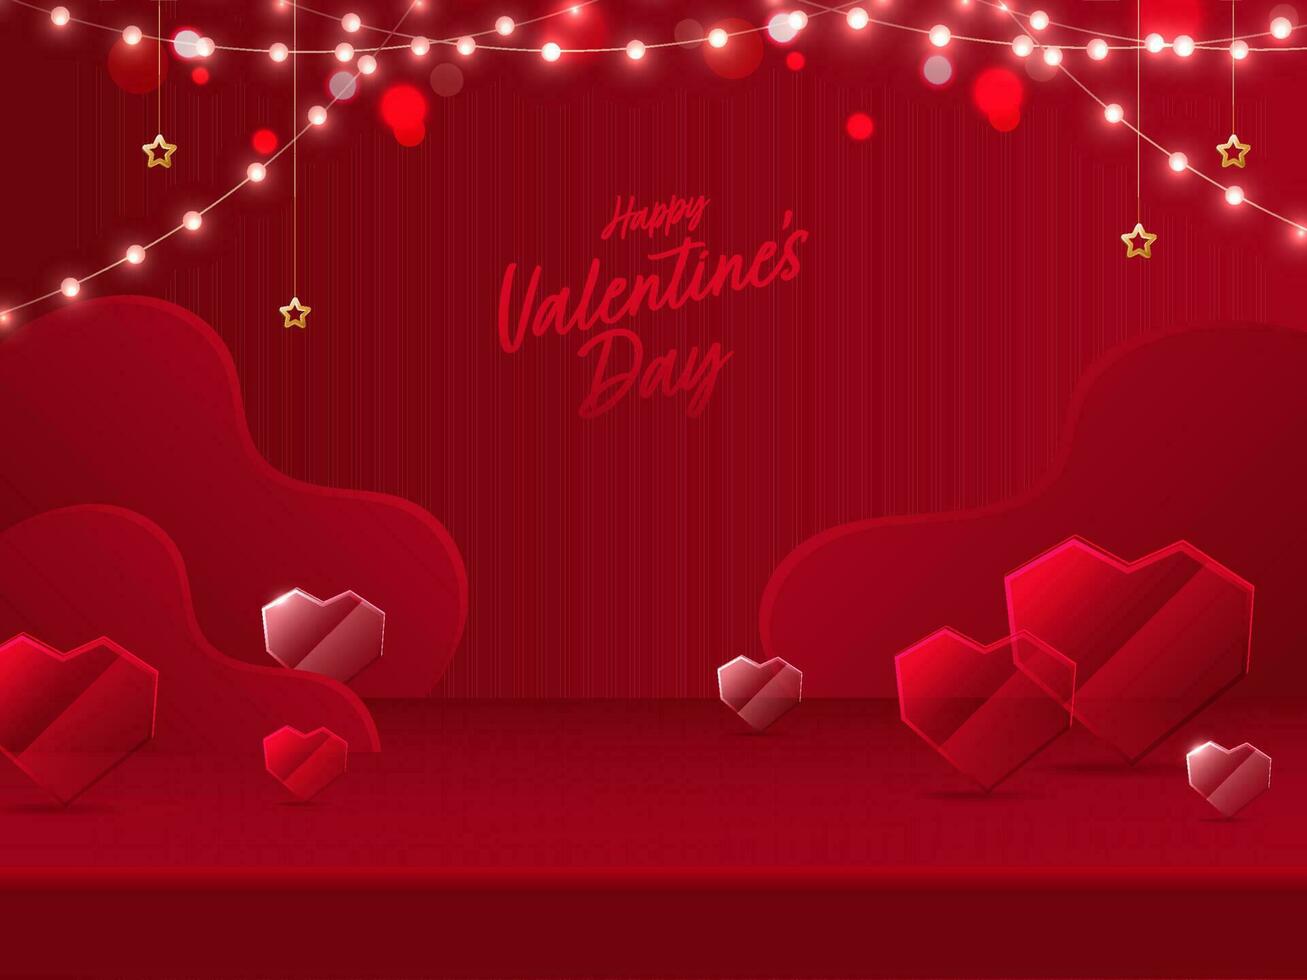 Happy Valentine's Day Font With Crystal Or Glass Hearts, Golden Stars And Lighting Garland On Red Background. vector